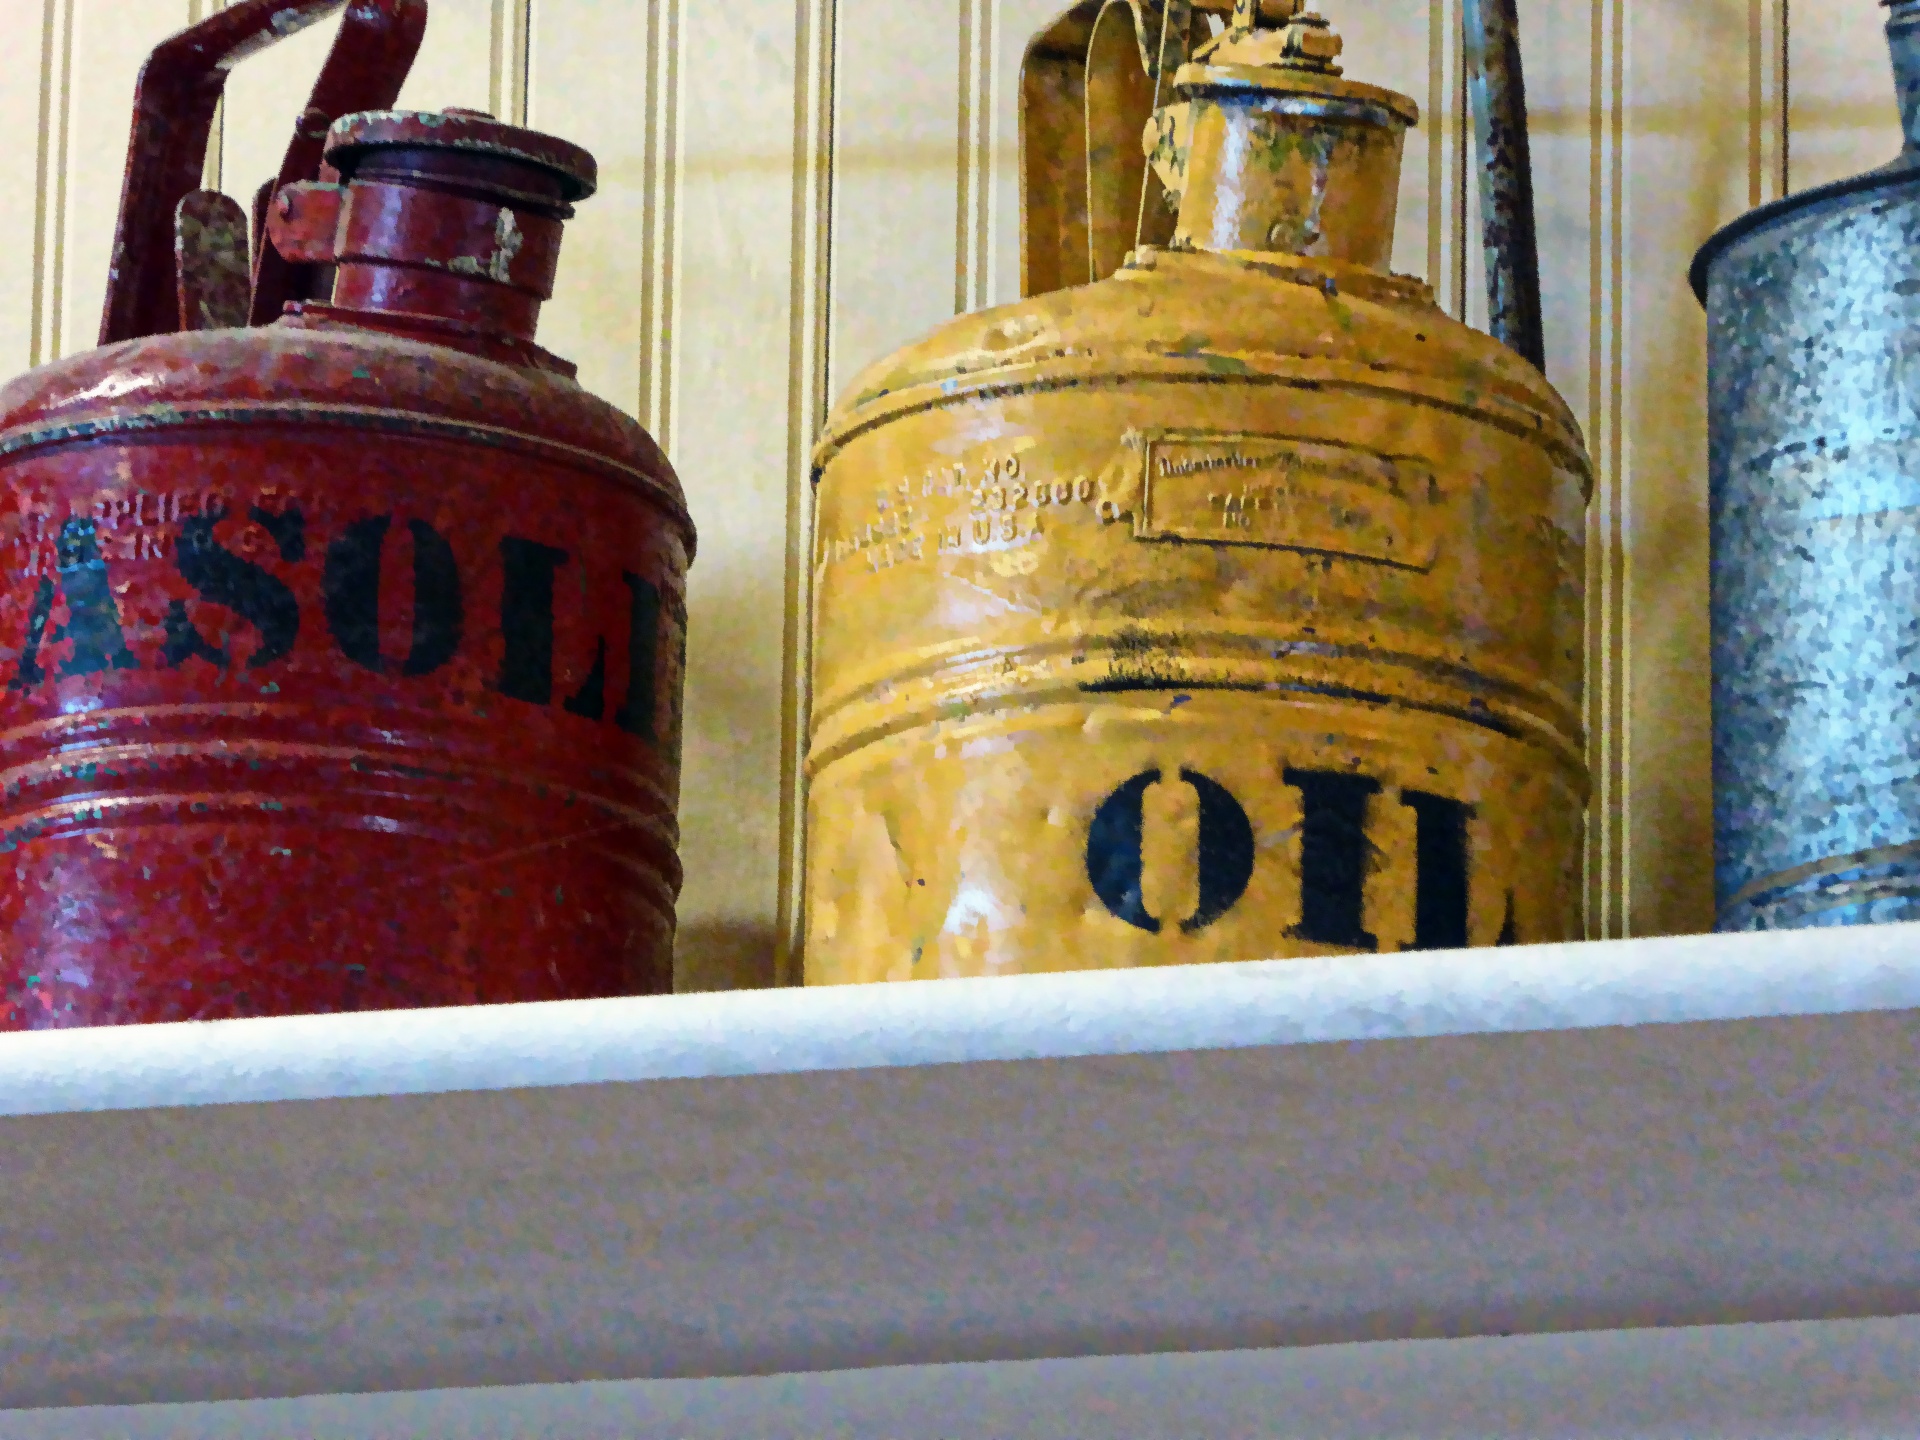 oil oil cans old free photo